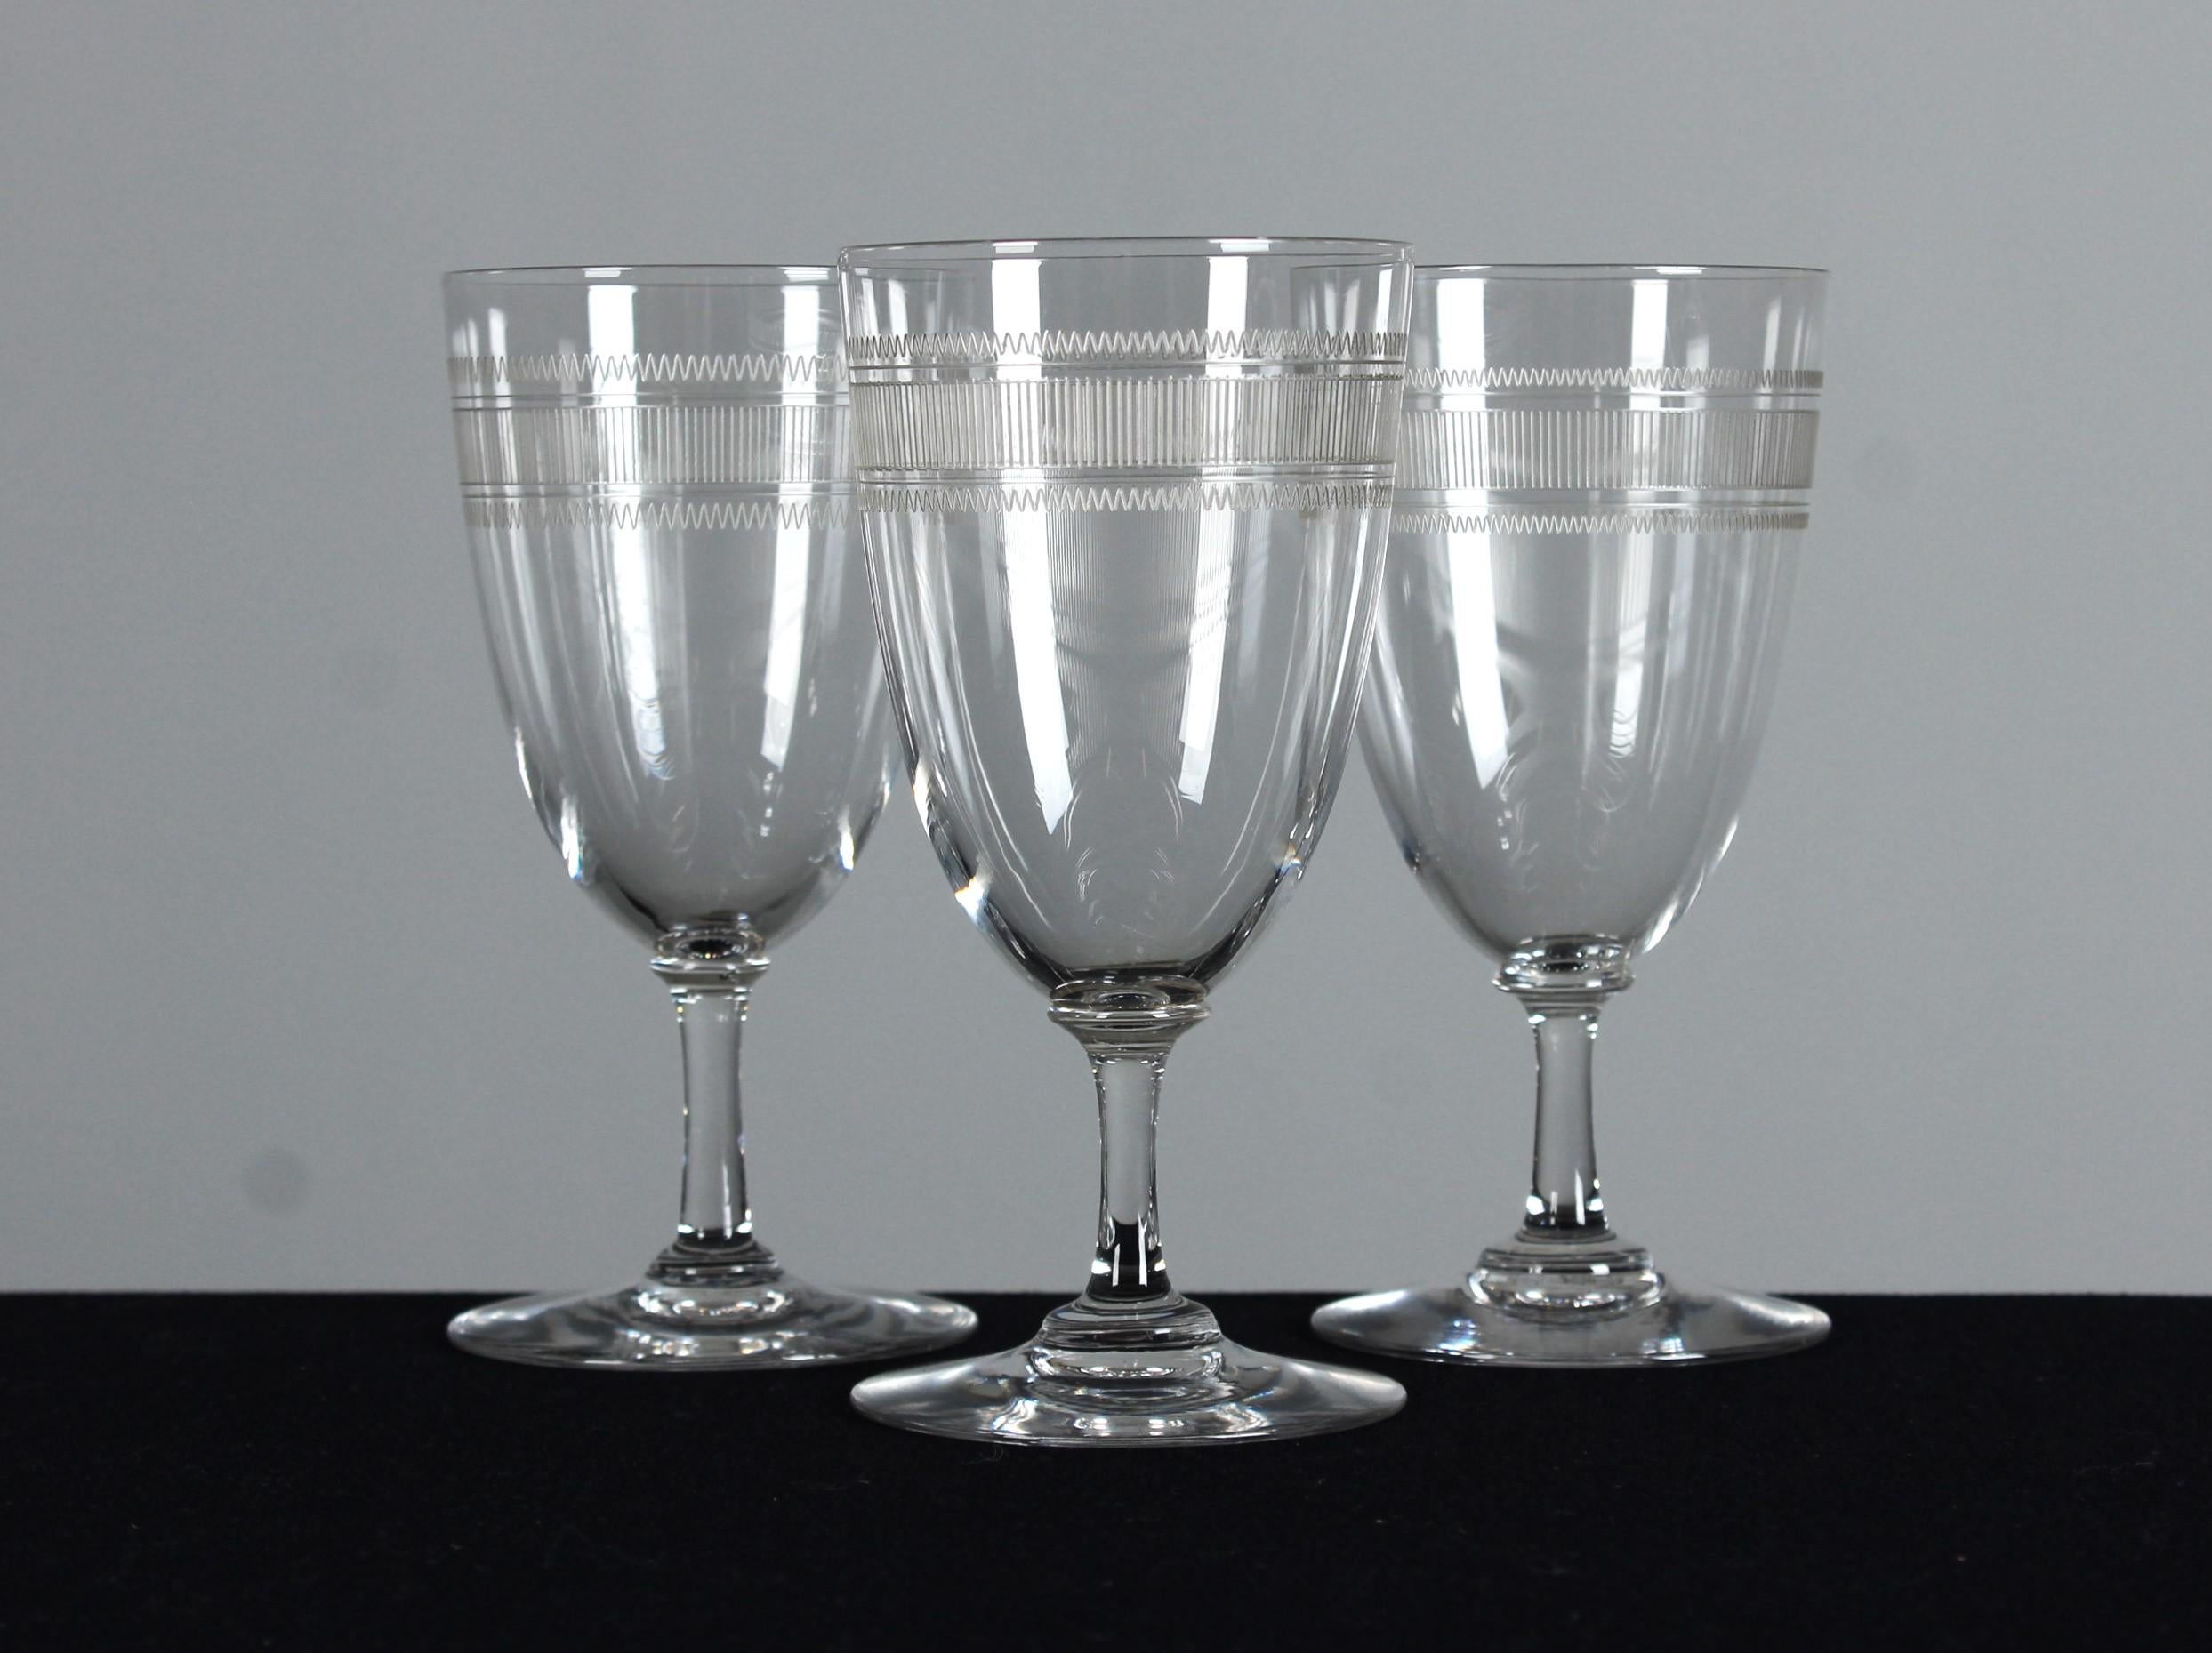 A beautiful set of three antique wine glasses with decorative design.

At the turn of the 20th century, the French culture of fine dining and socialising flourished, leading to the emergence of a symbol of French epicurean culture: the aperitif